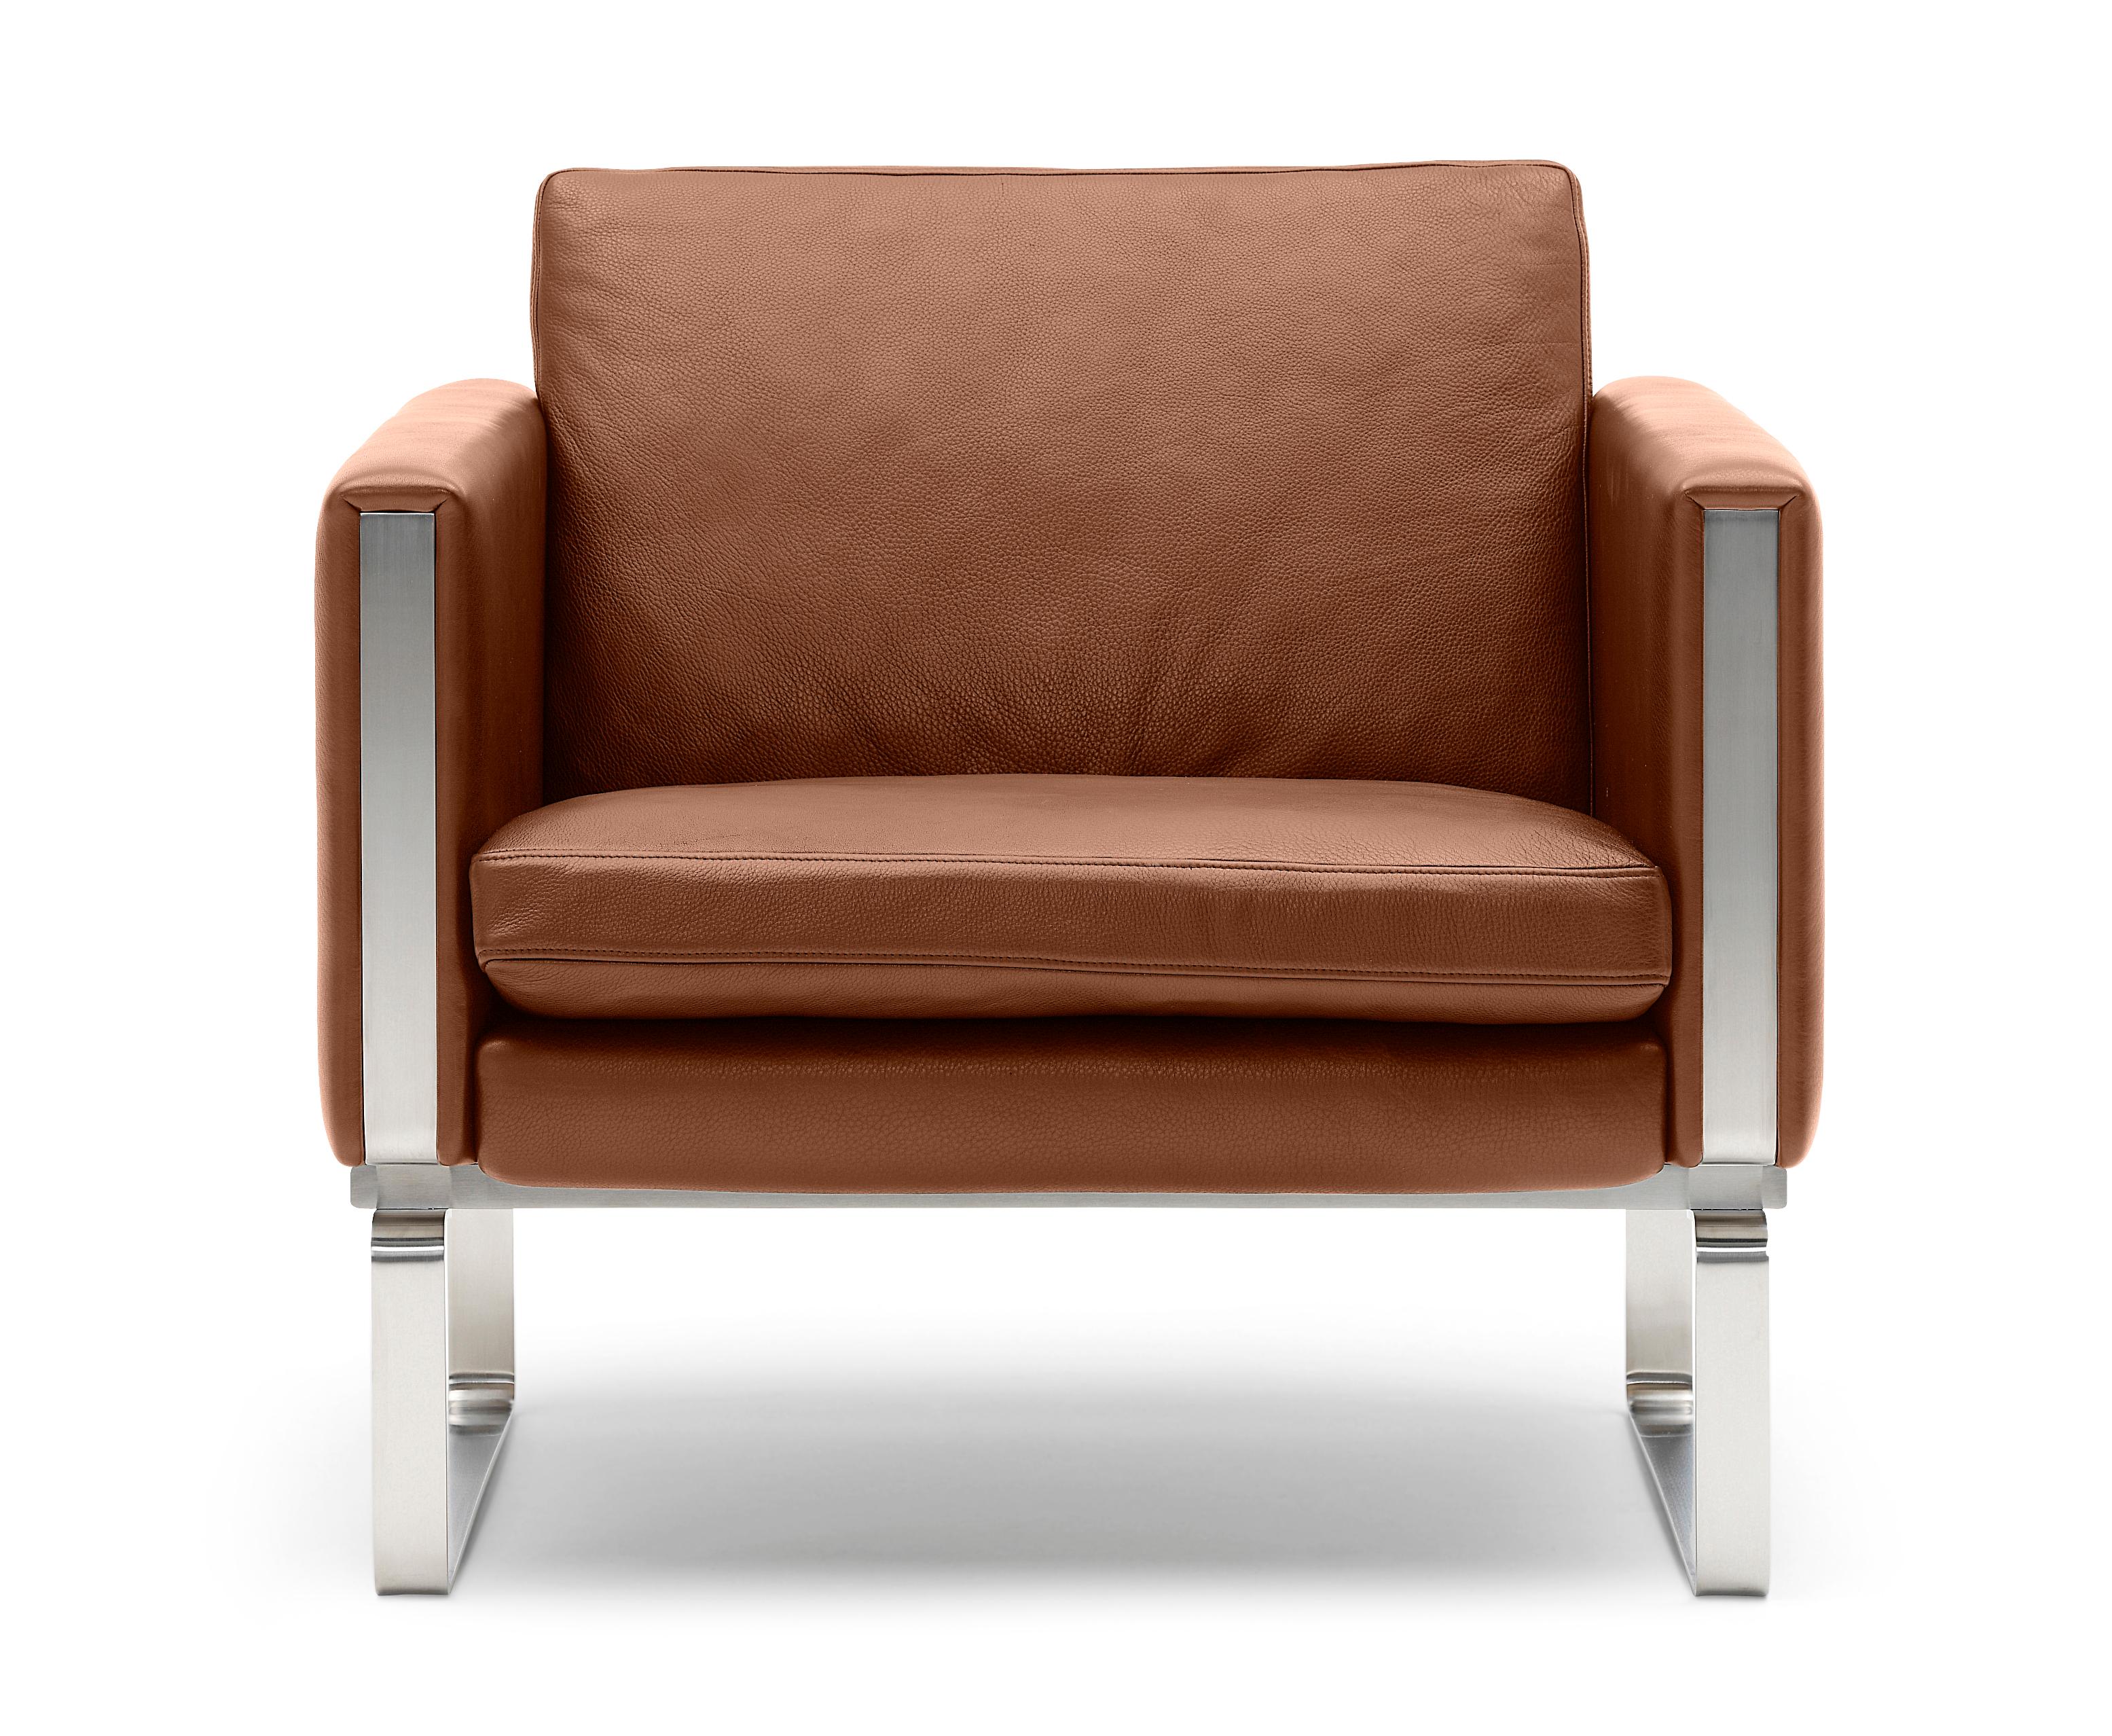 Brown (Thor 307) CH101 Chair in Stainless Steel Frame with Leather Seat by Hans J. Wegner